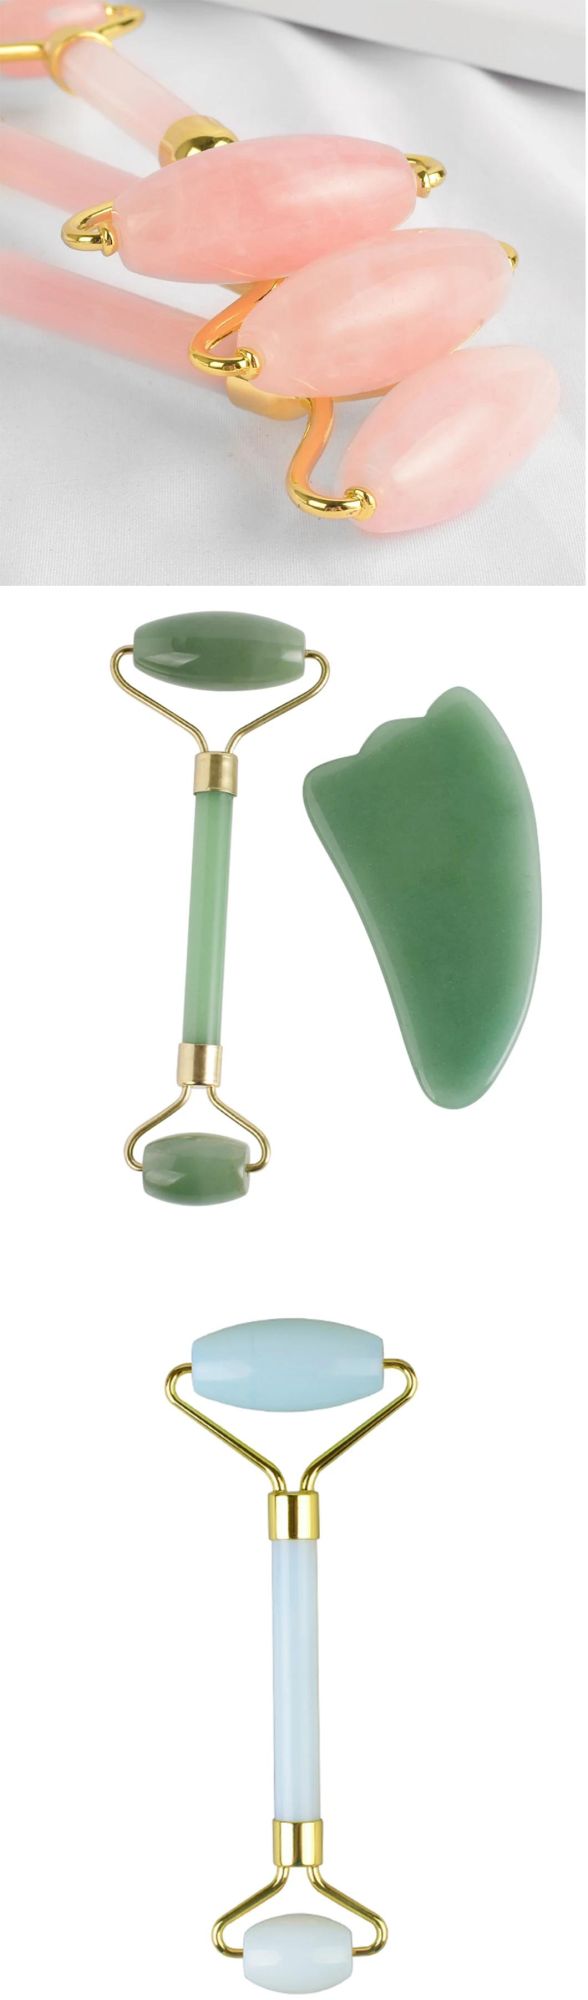 Jade Roller Real Natural Stone Facial Massager Welded Smooth Double Roller